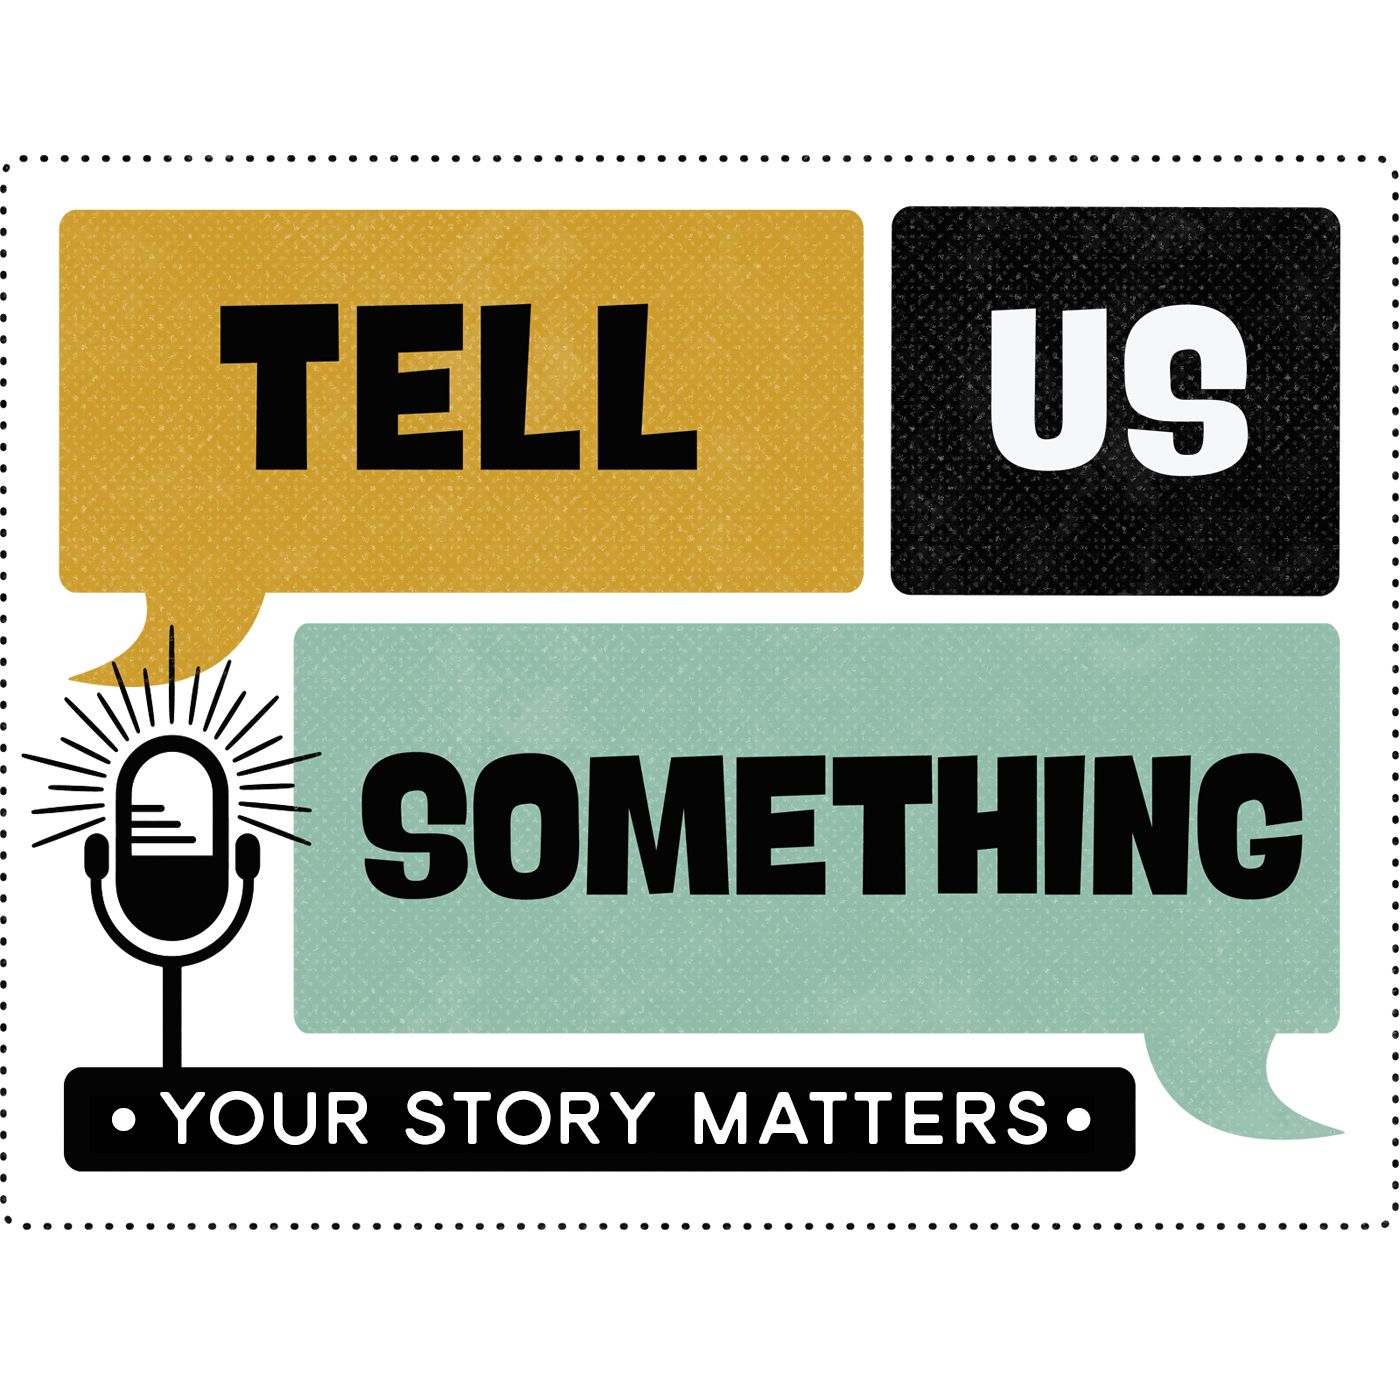 Tell Us Something A Celebration of Storytelling, Community and Each Other picture image image